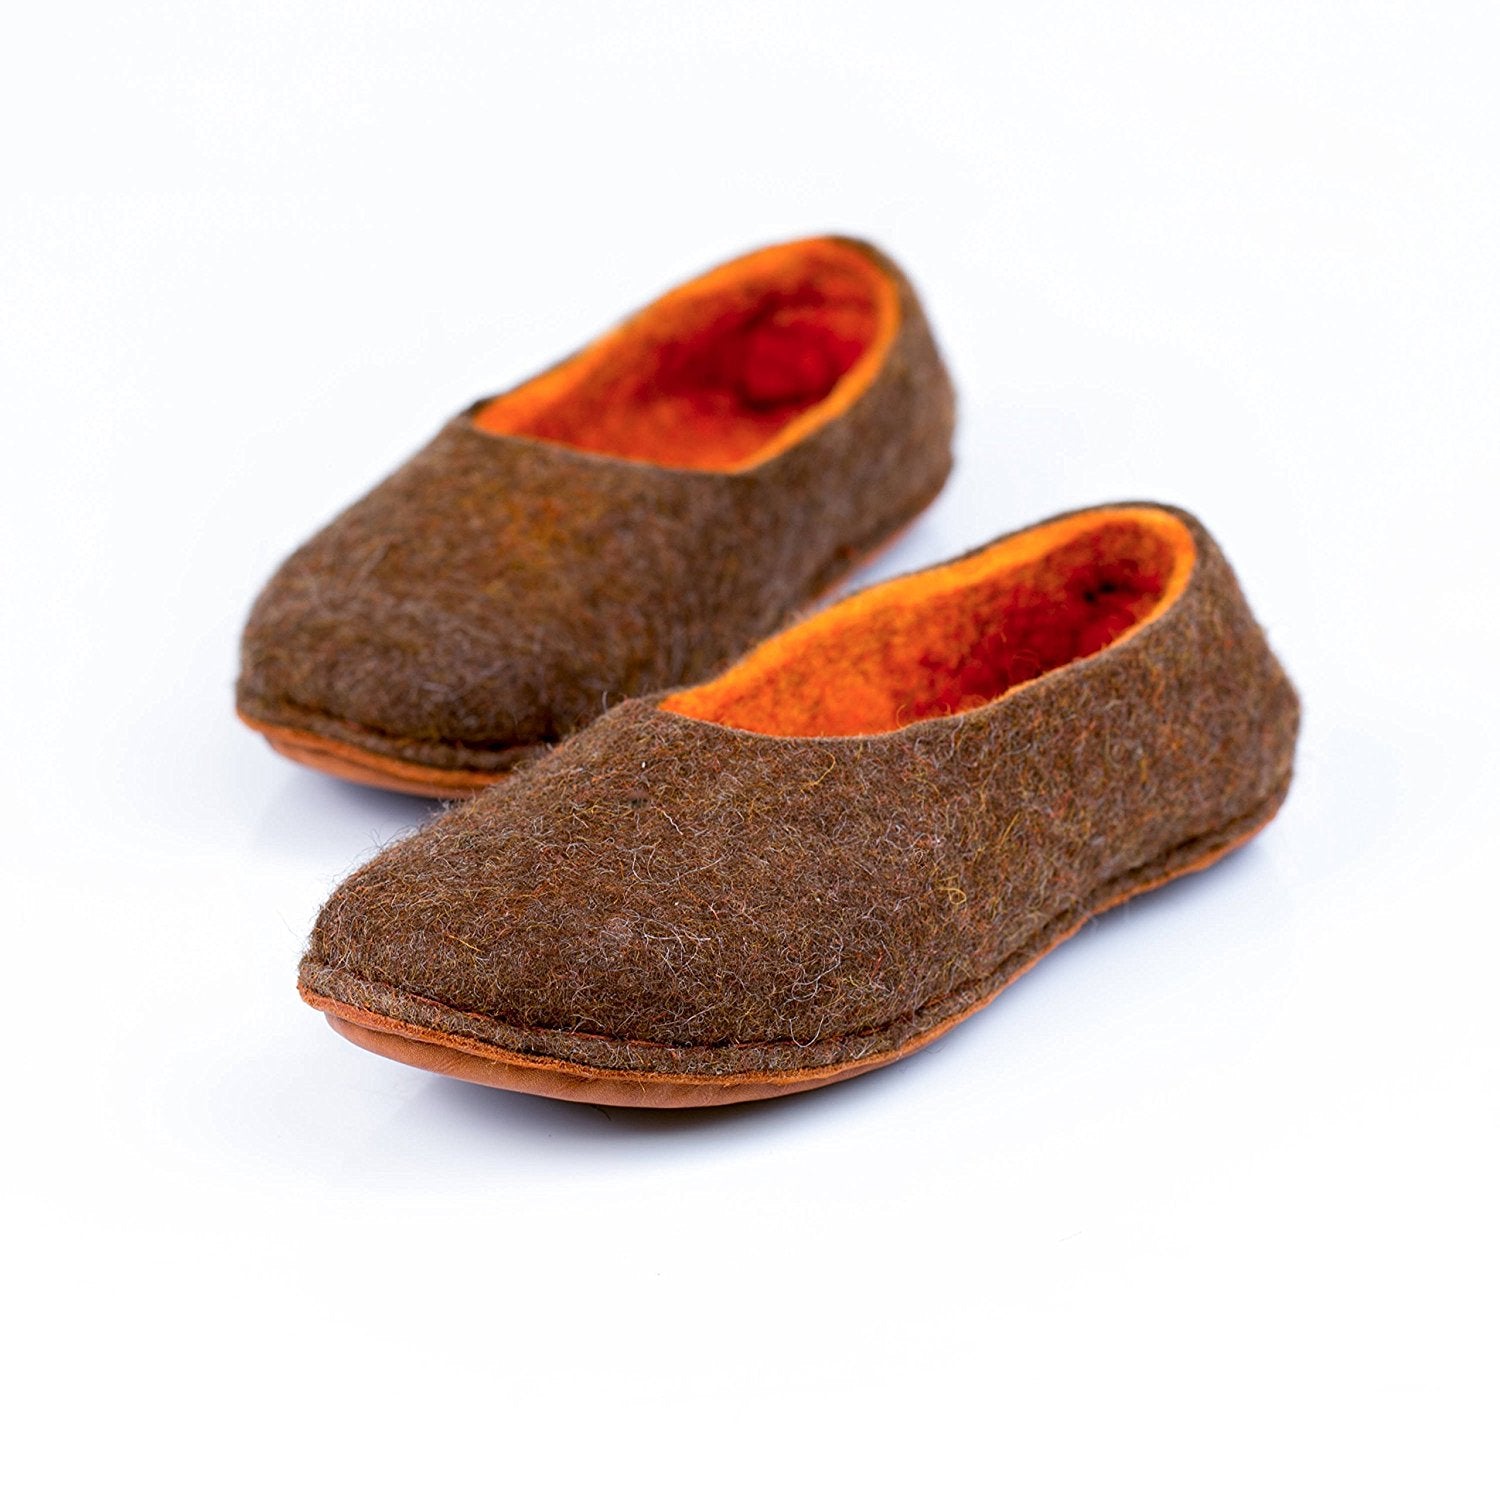 Beige/Orange felted wool slippers that were decorated with alpaca wool